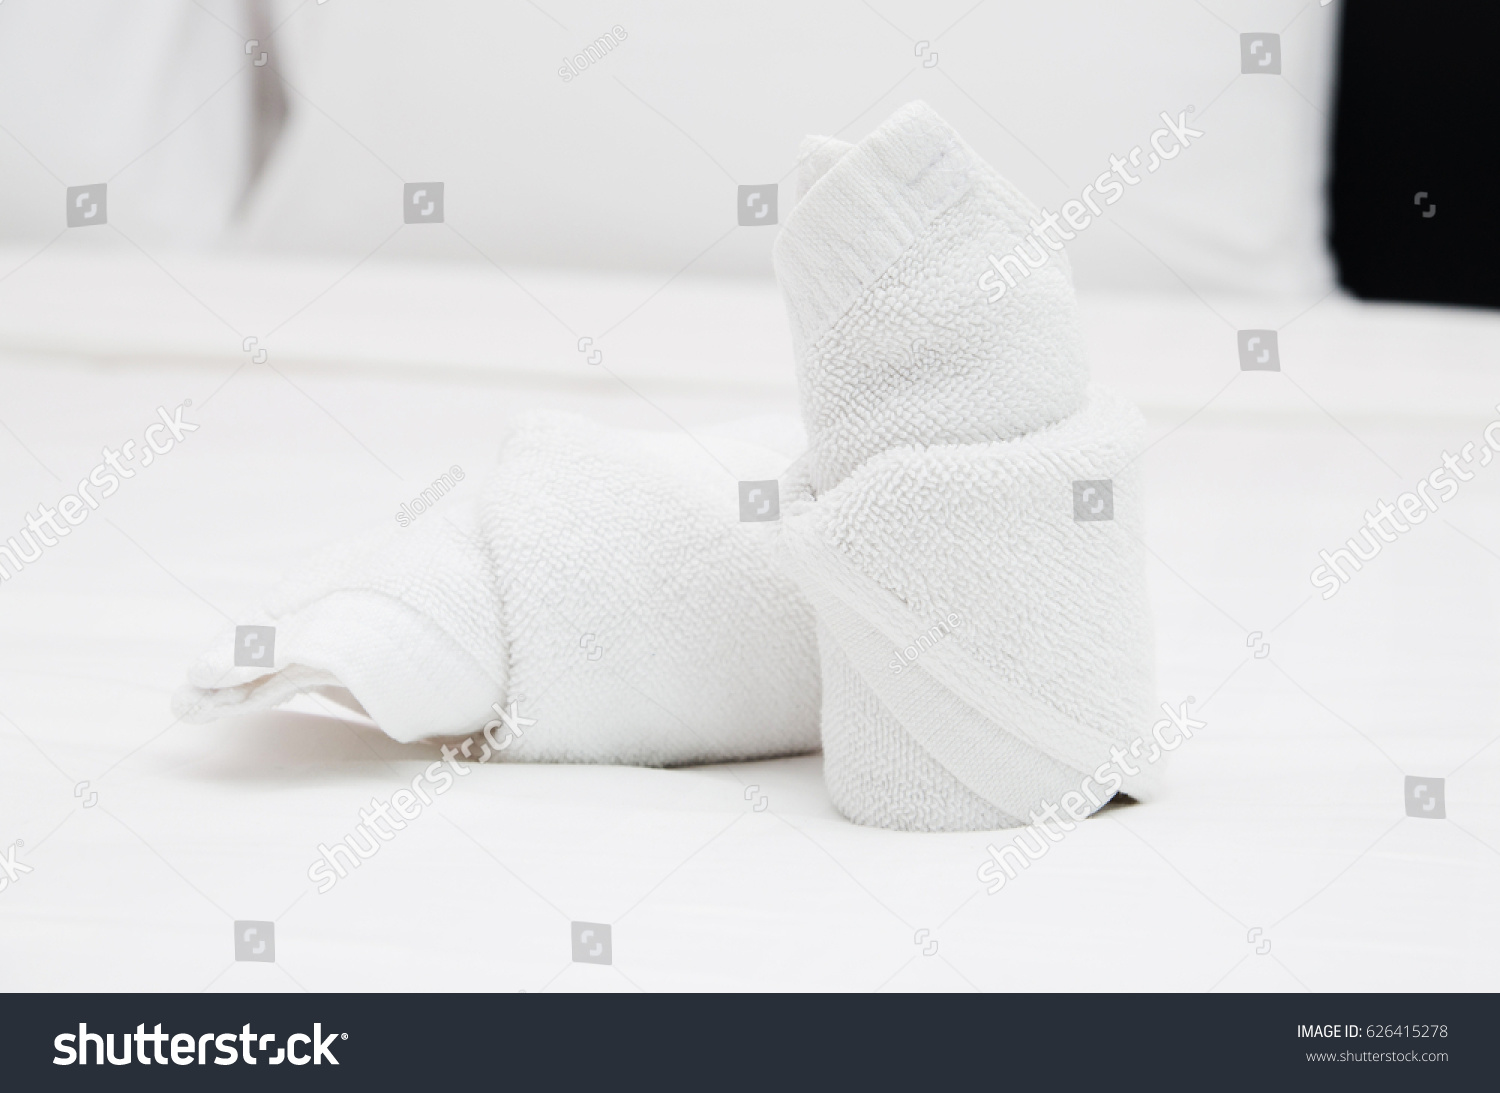 Bath towels on the bed of hotel bedroom #626415278